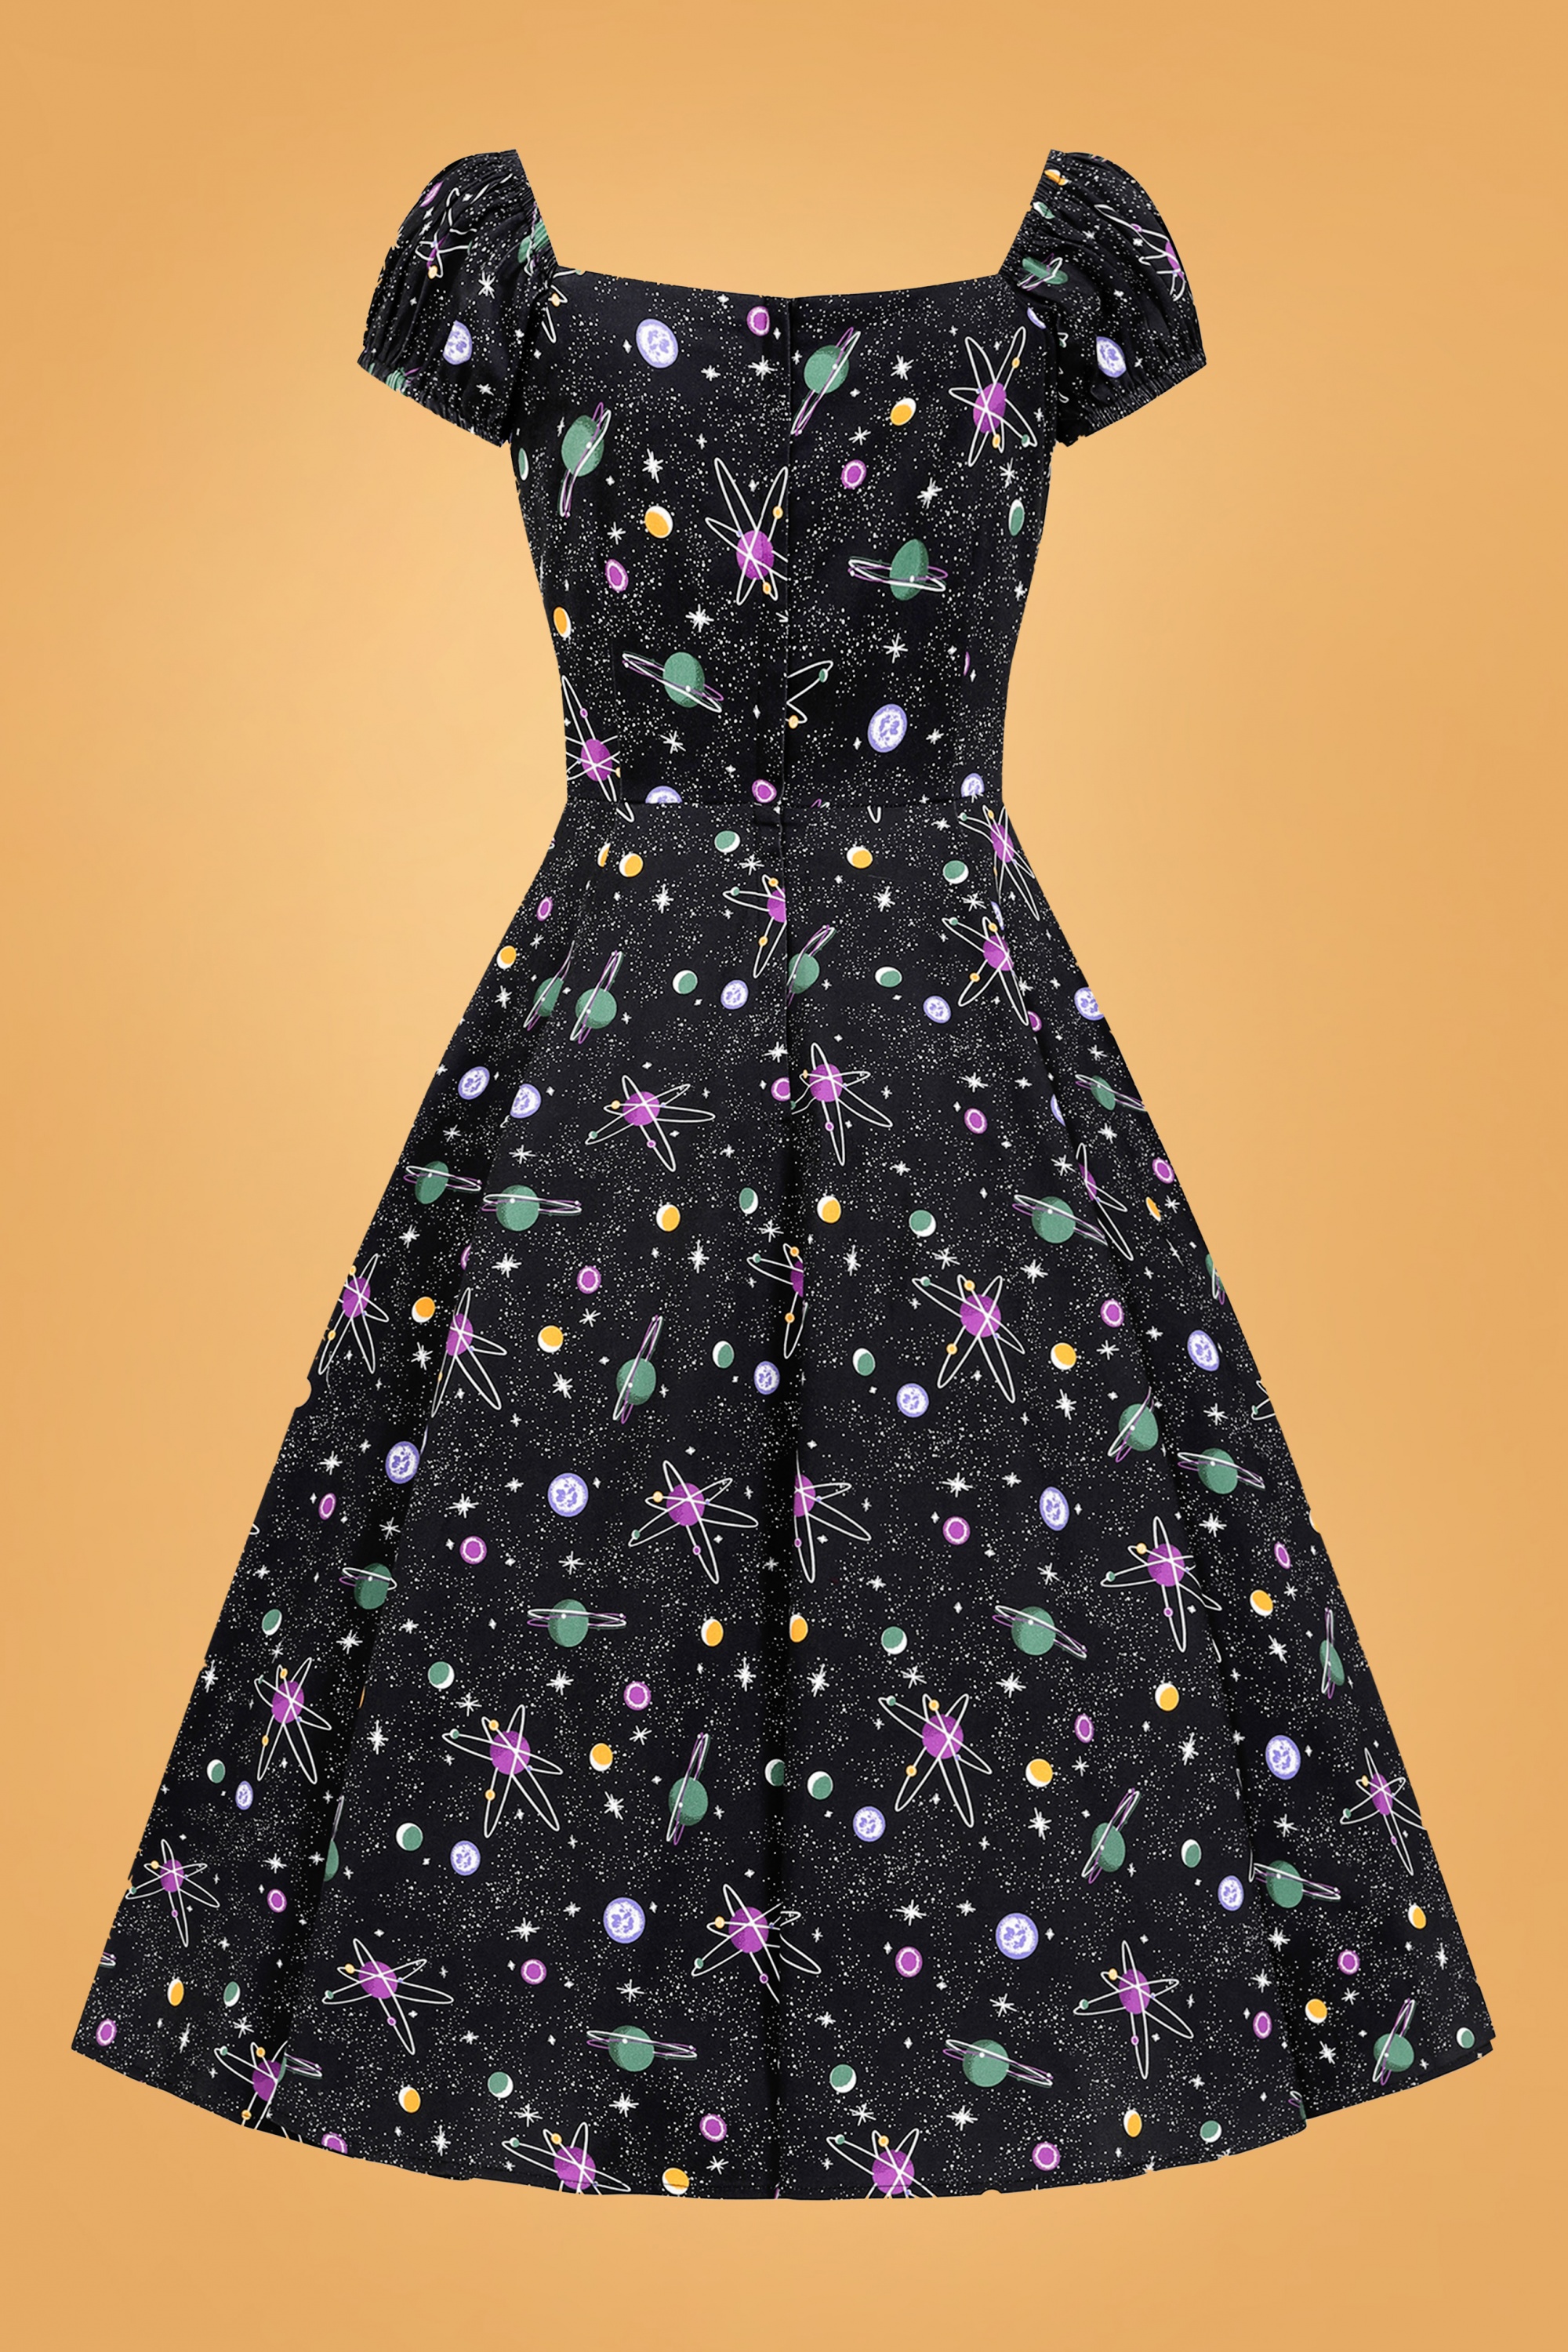 Collectif Clothing - Dolores Galaxy Dreamer Doll jurk in zwart 3